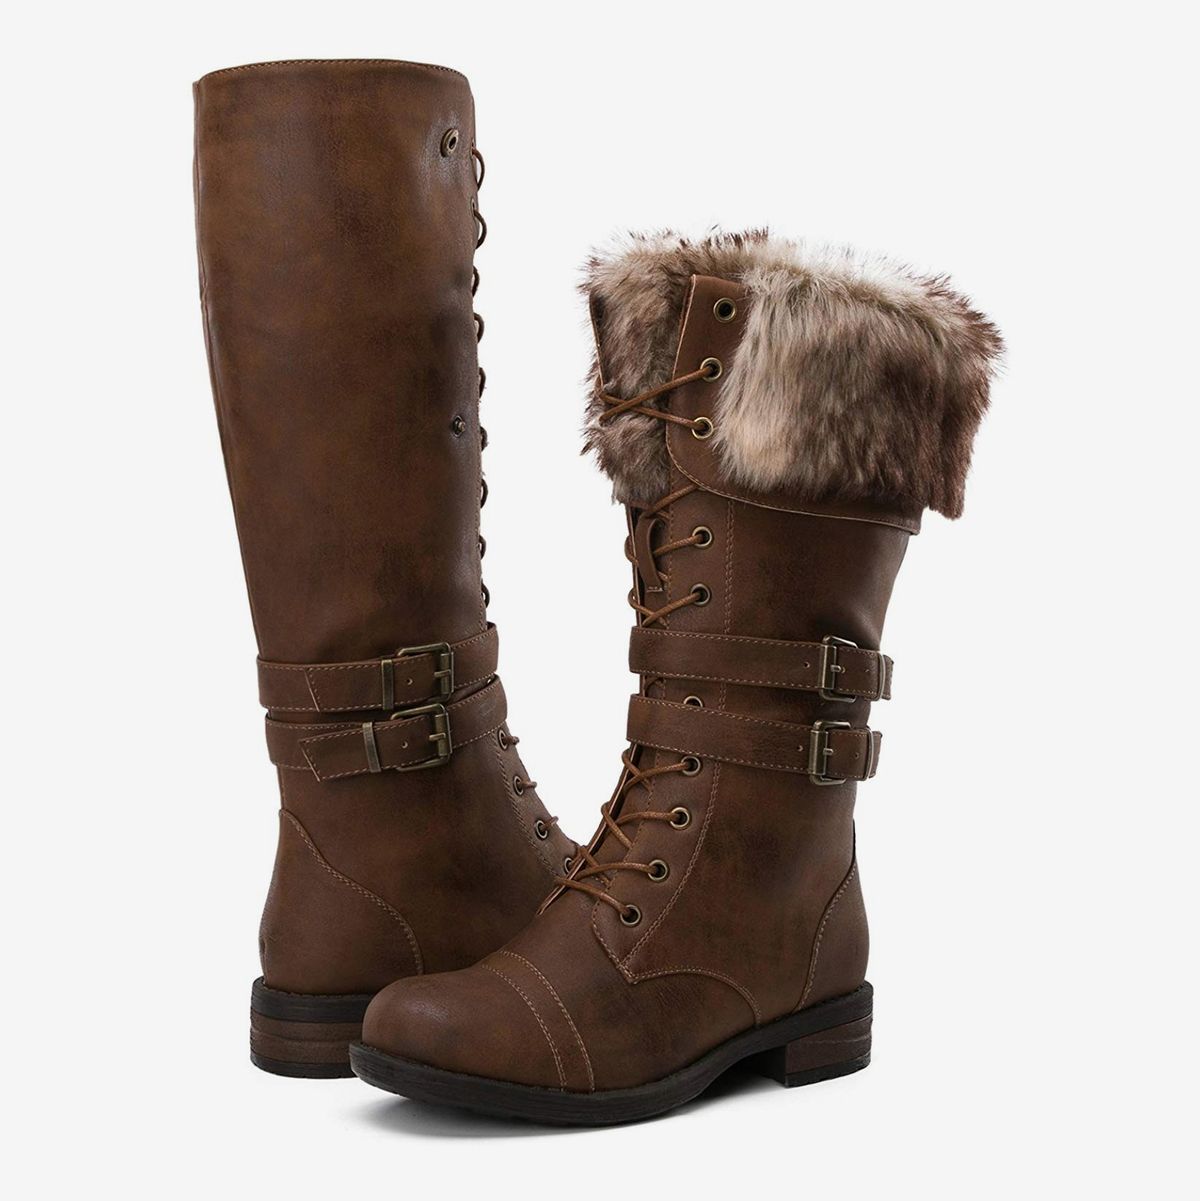 Womens Warm Round Toe Faux Fur Lined Pull On Flat Under The Knee High Snow Boots 